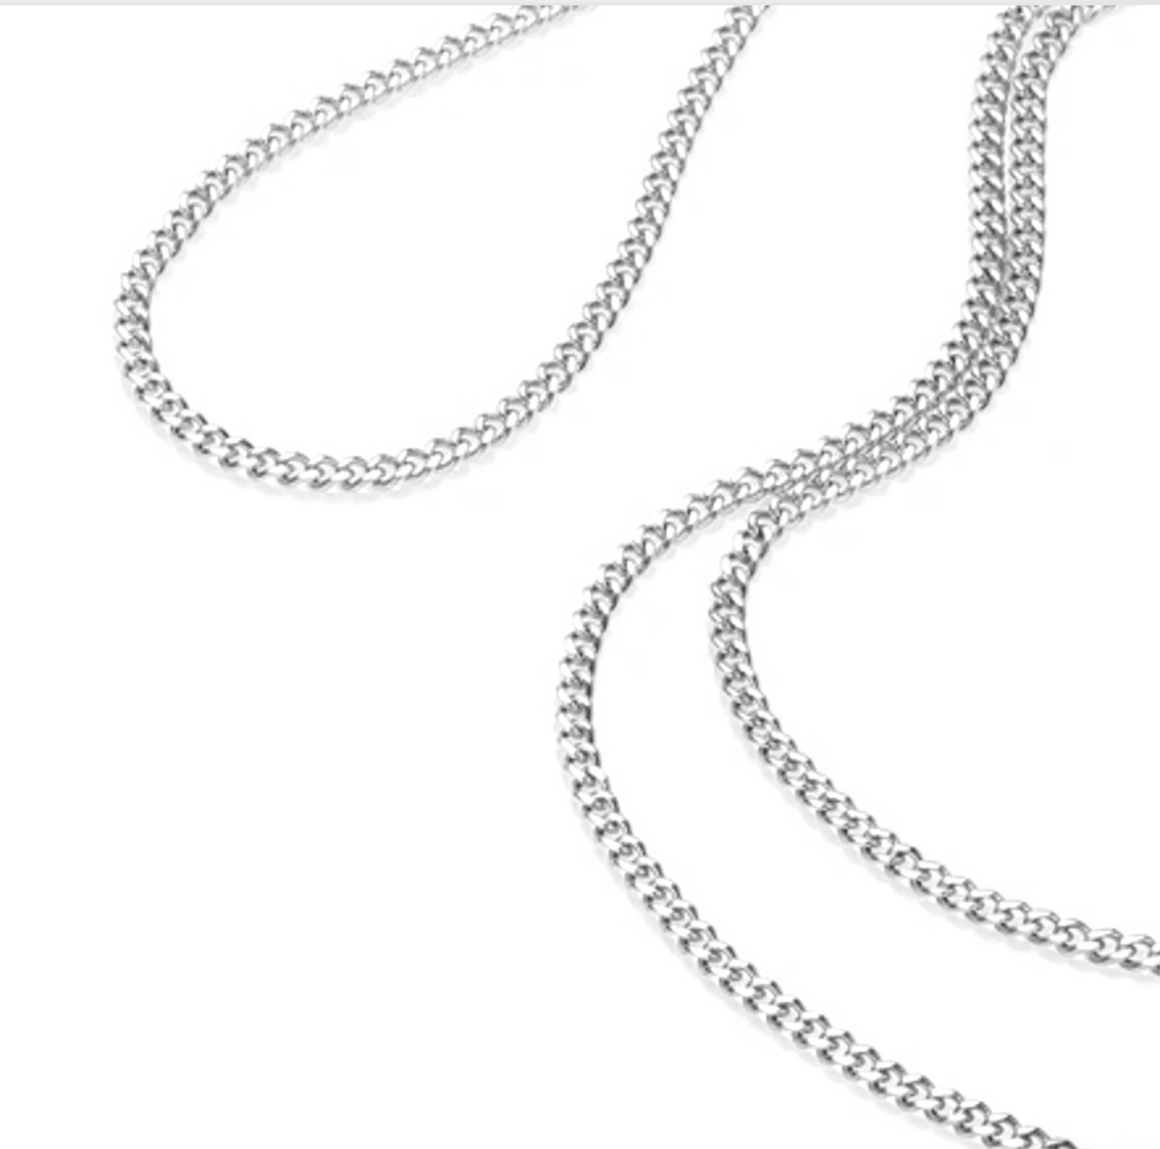 54 FLORAL 'CONNELL' 3mm CURB NECKLACE CHAIN - SILVER